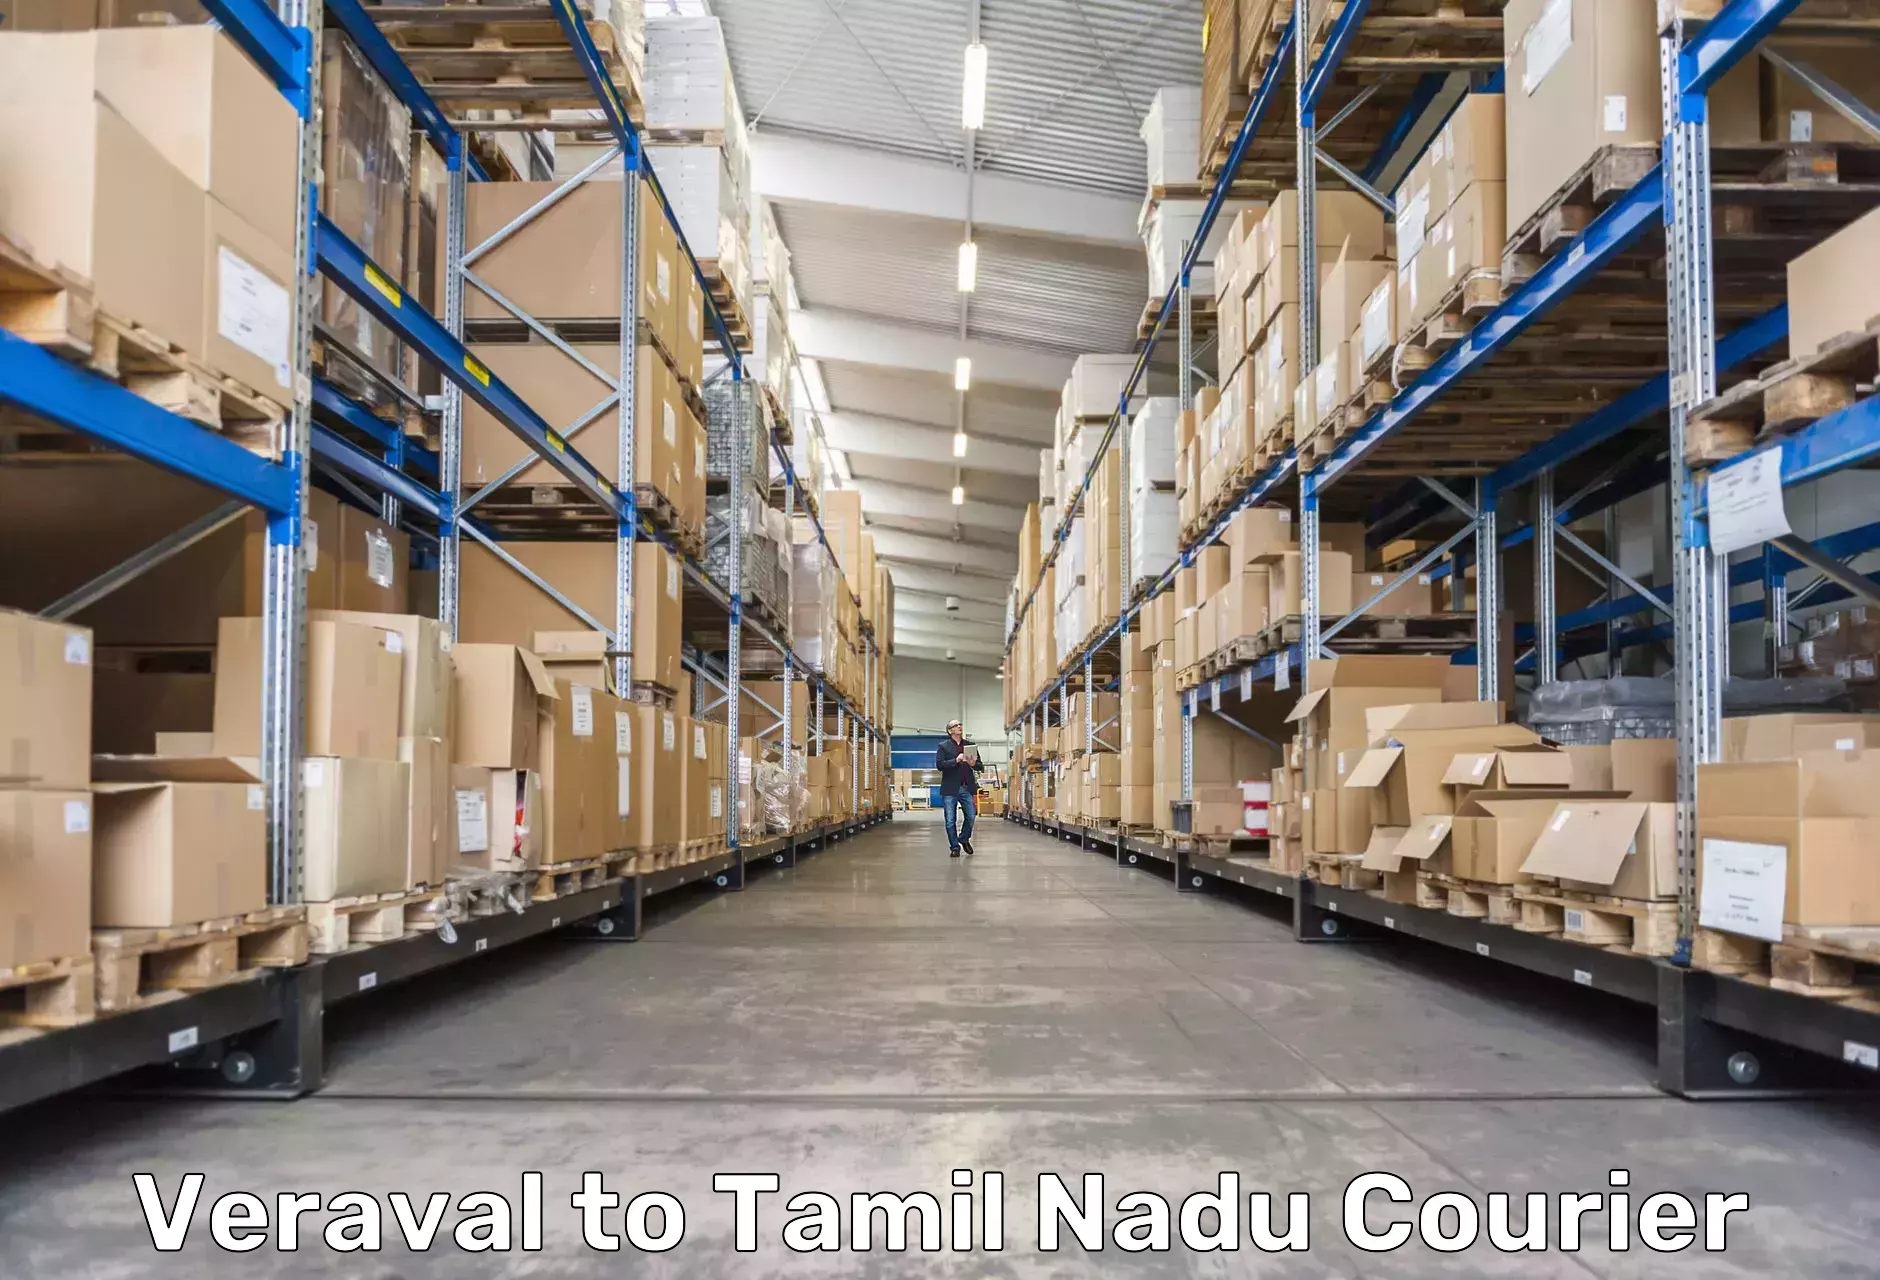 Affordable parcel service Veraval to Ennore Port Chennai